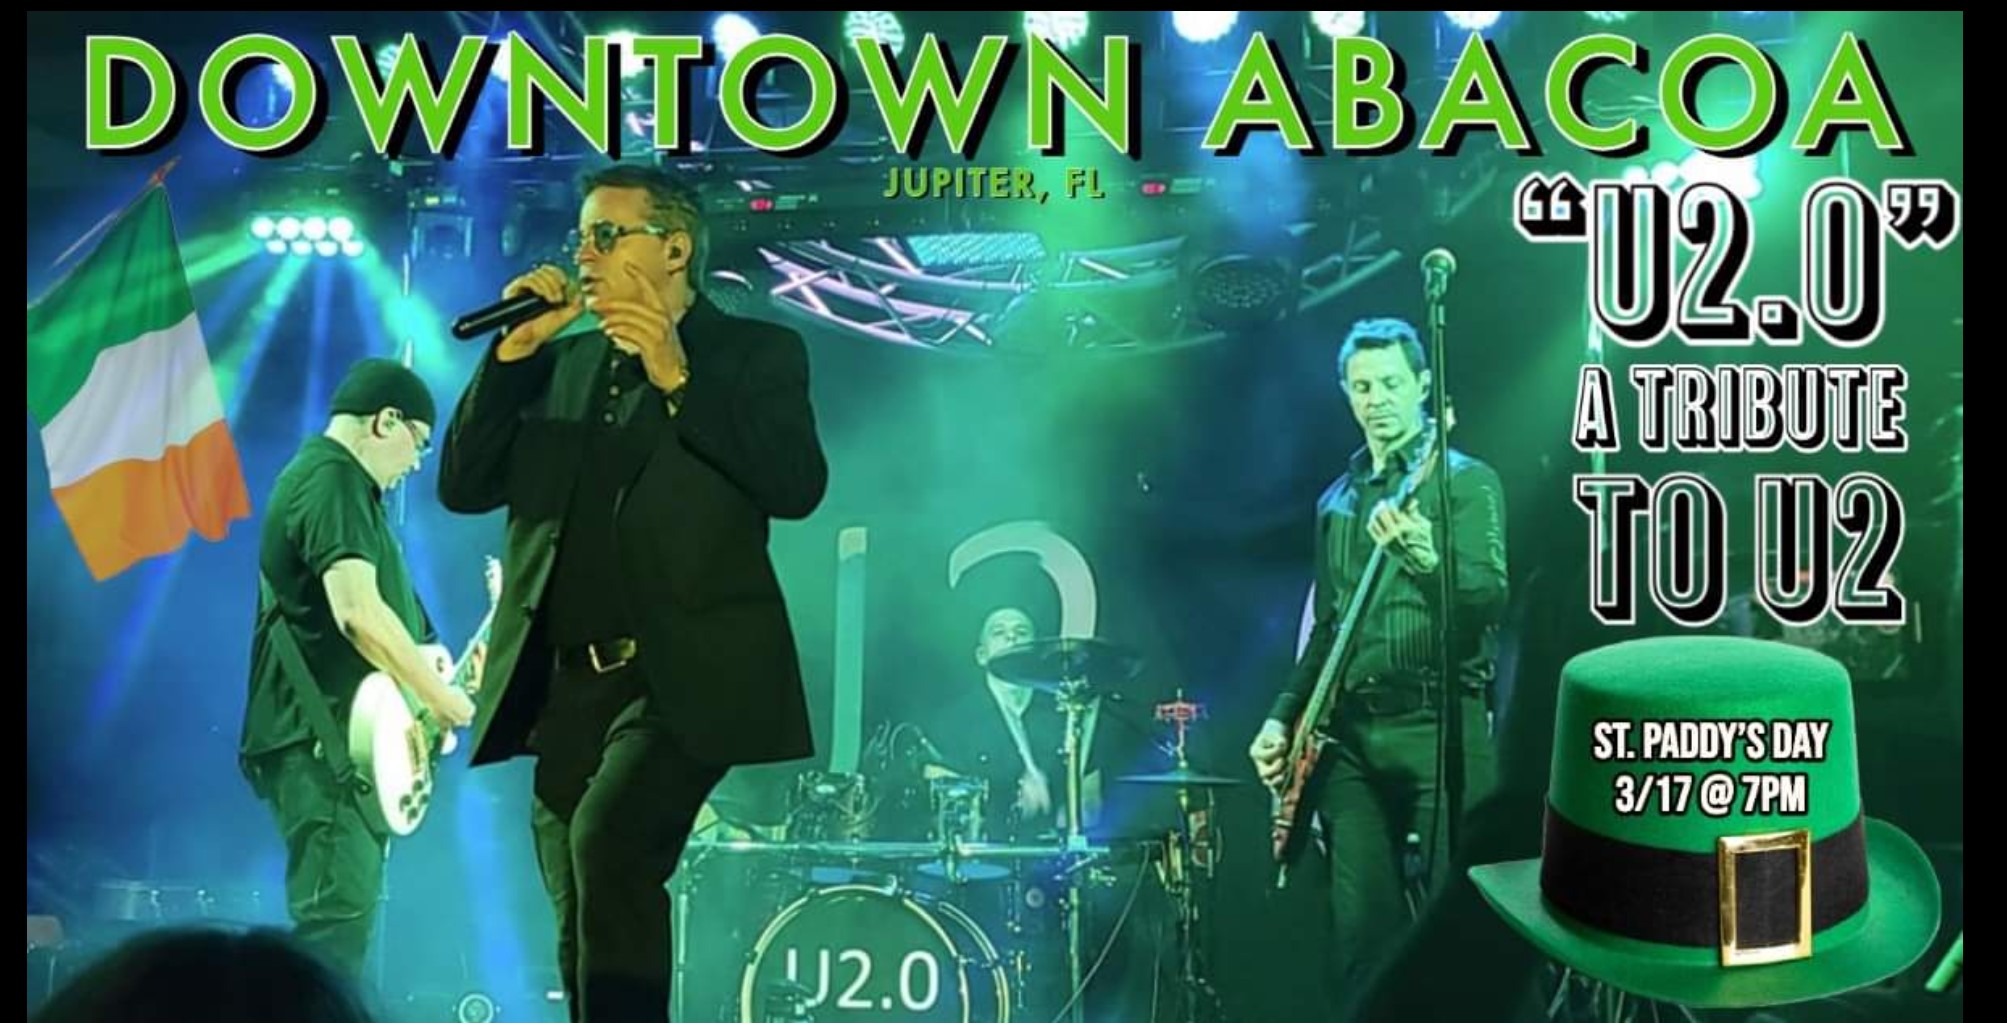 Abacoa POA St Patty's Day Concert with U2.0 A tribute to U2 at